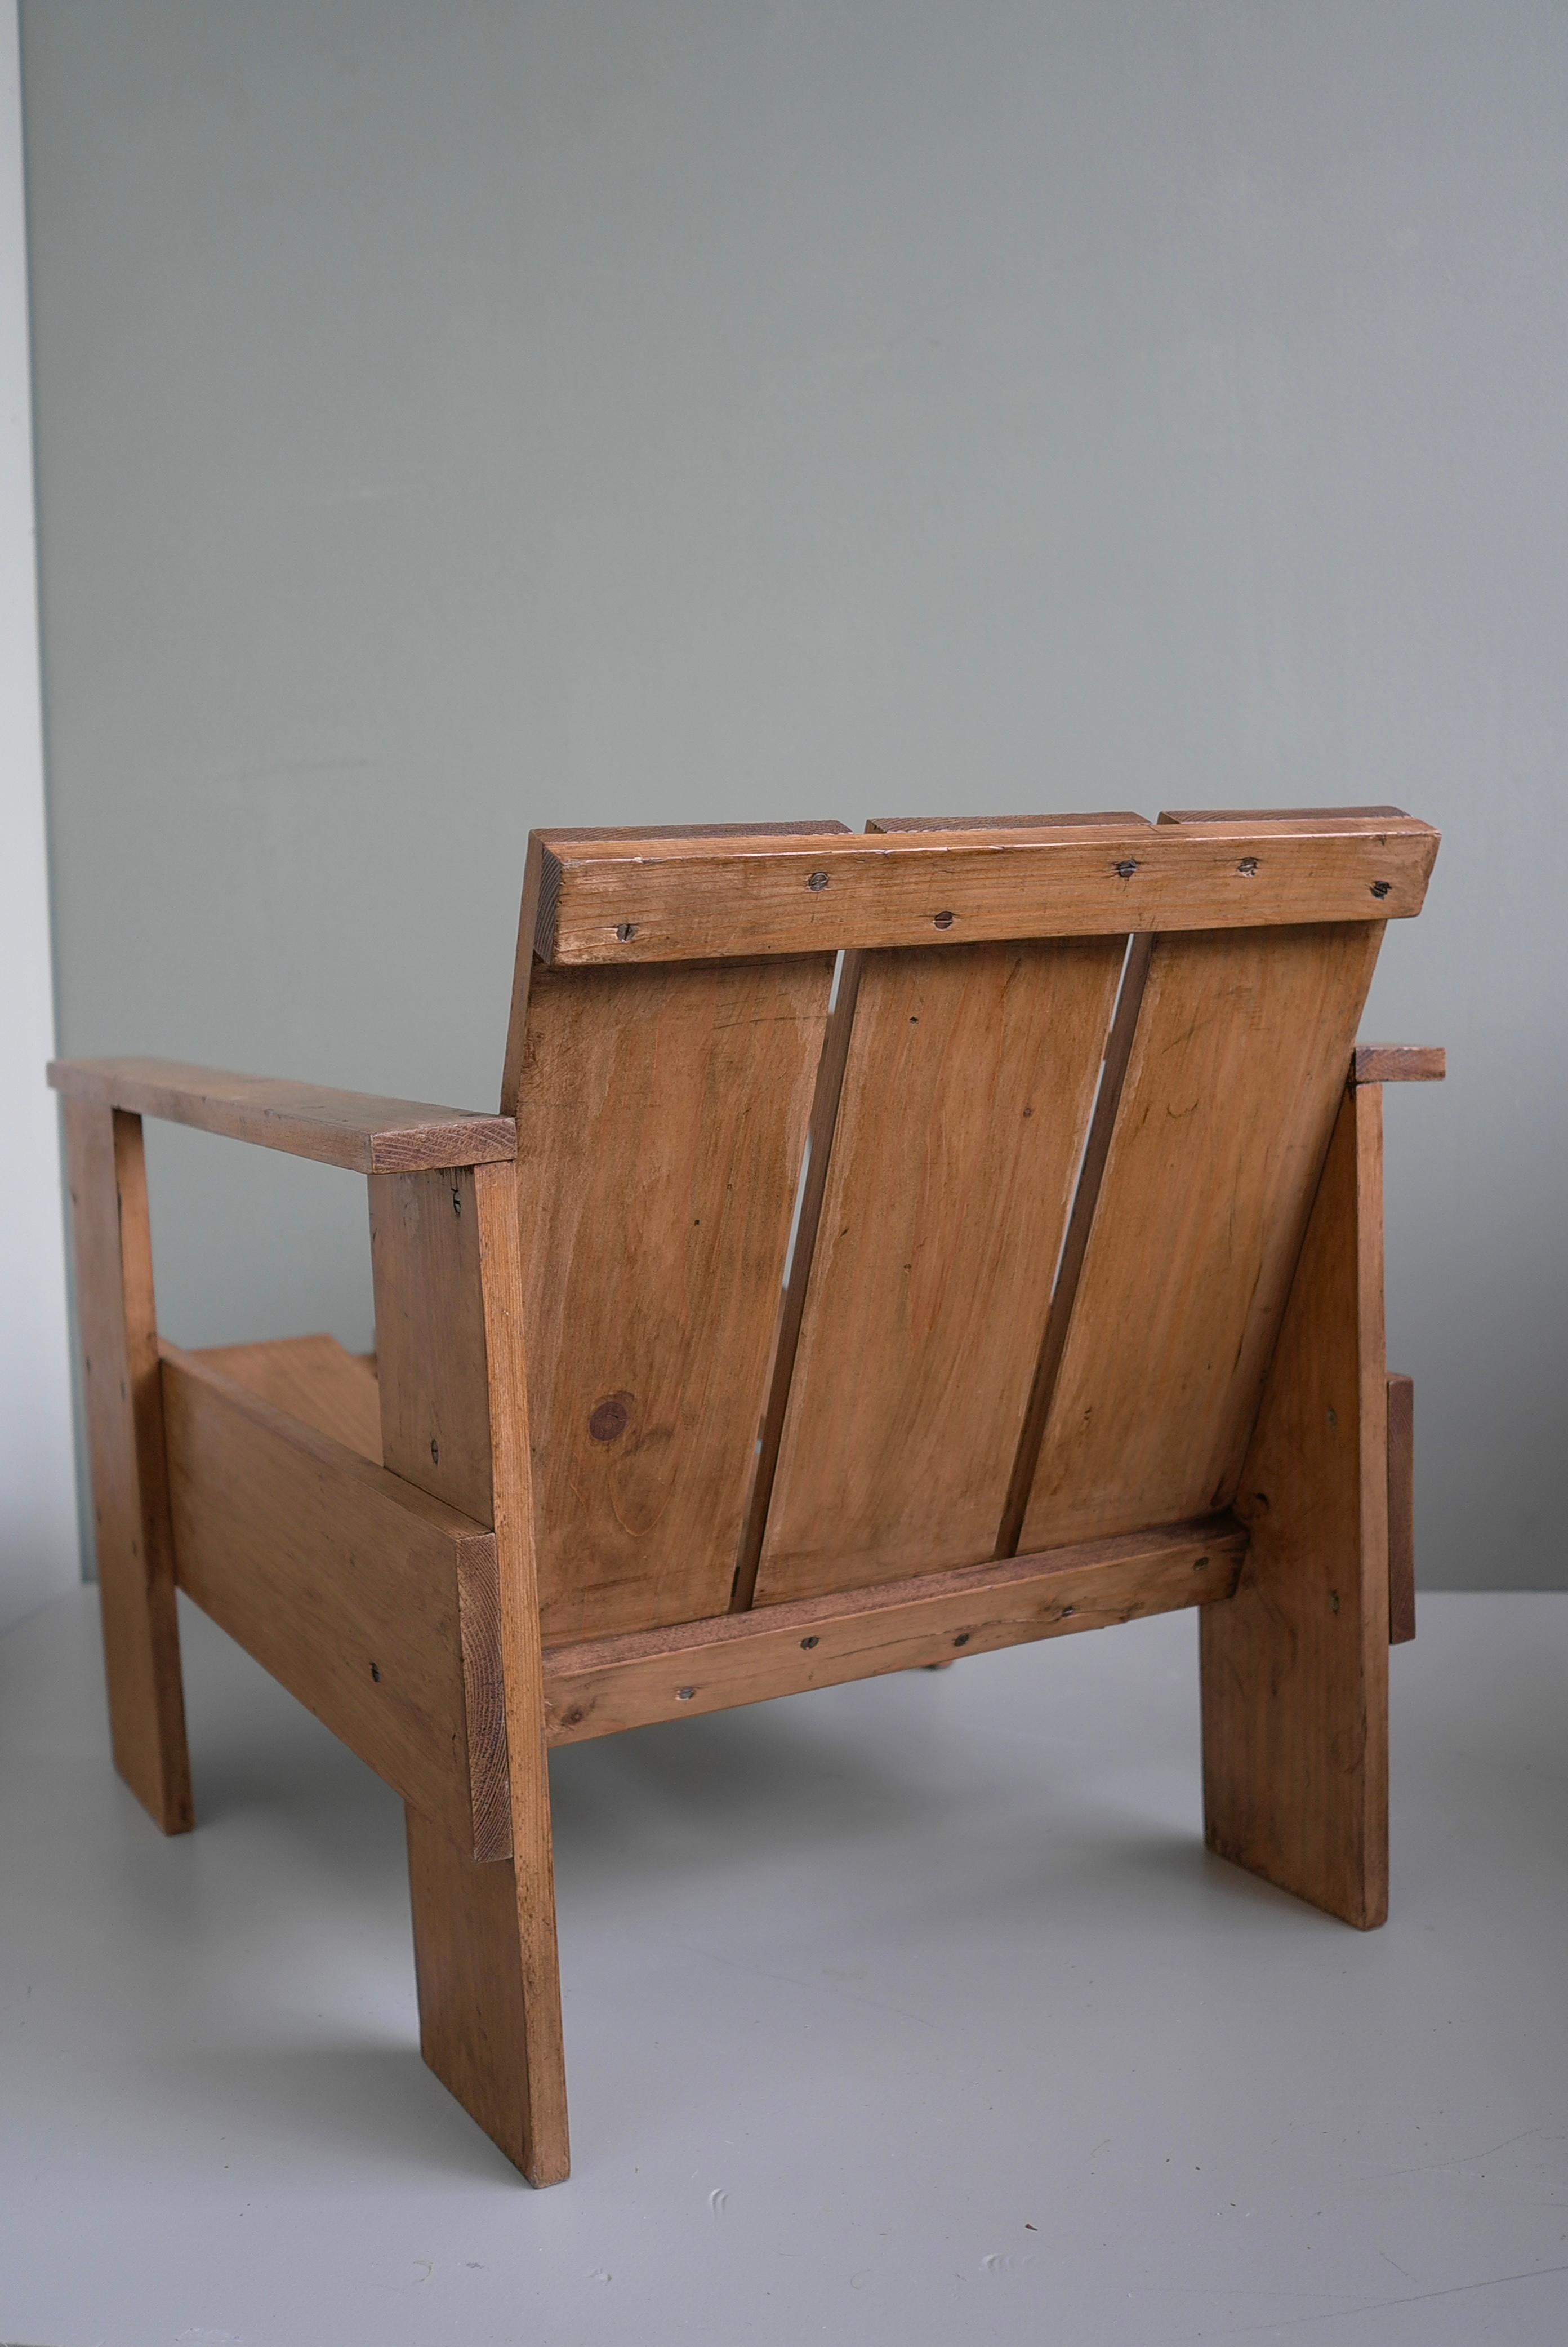 Crate Chair in style of Gerrit Rietveld, The Netherlands 1960's For Sale 1